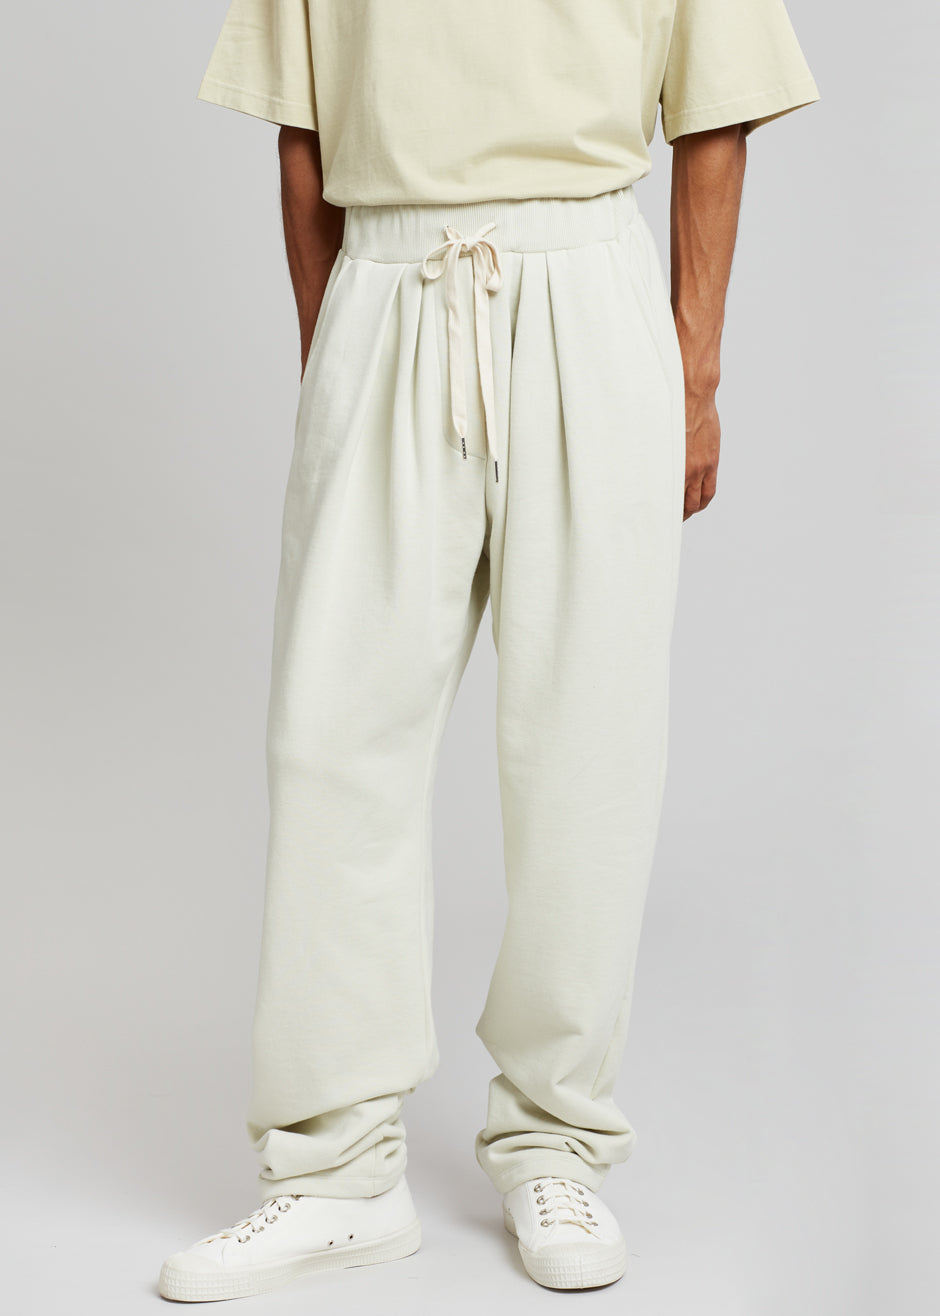 Frankie Shop Pleated Cotton and Linen Pants